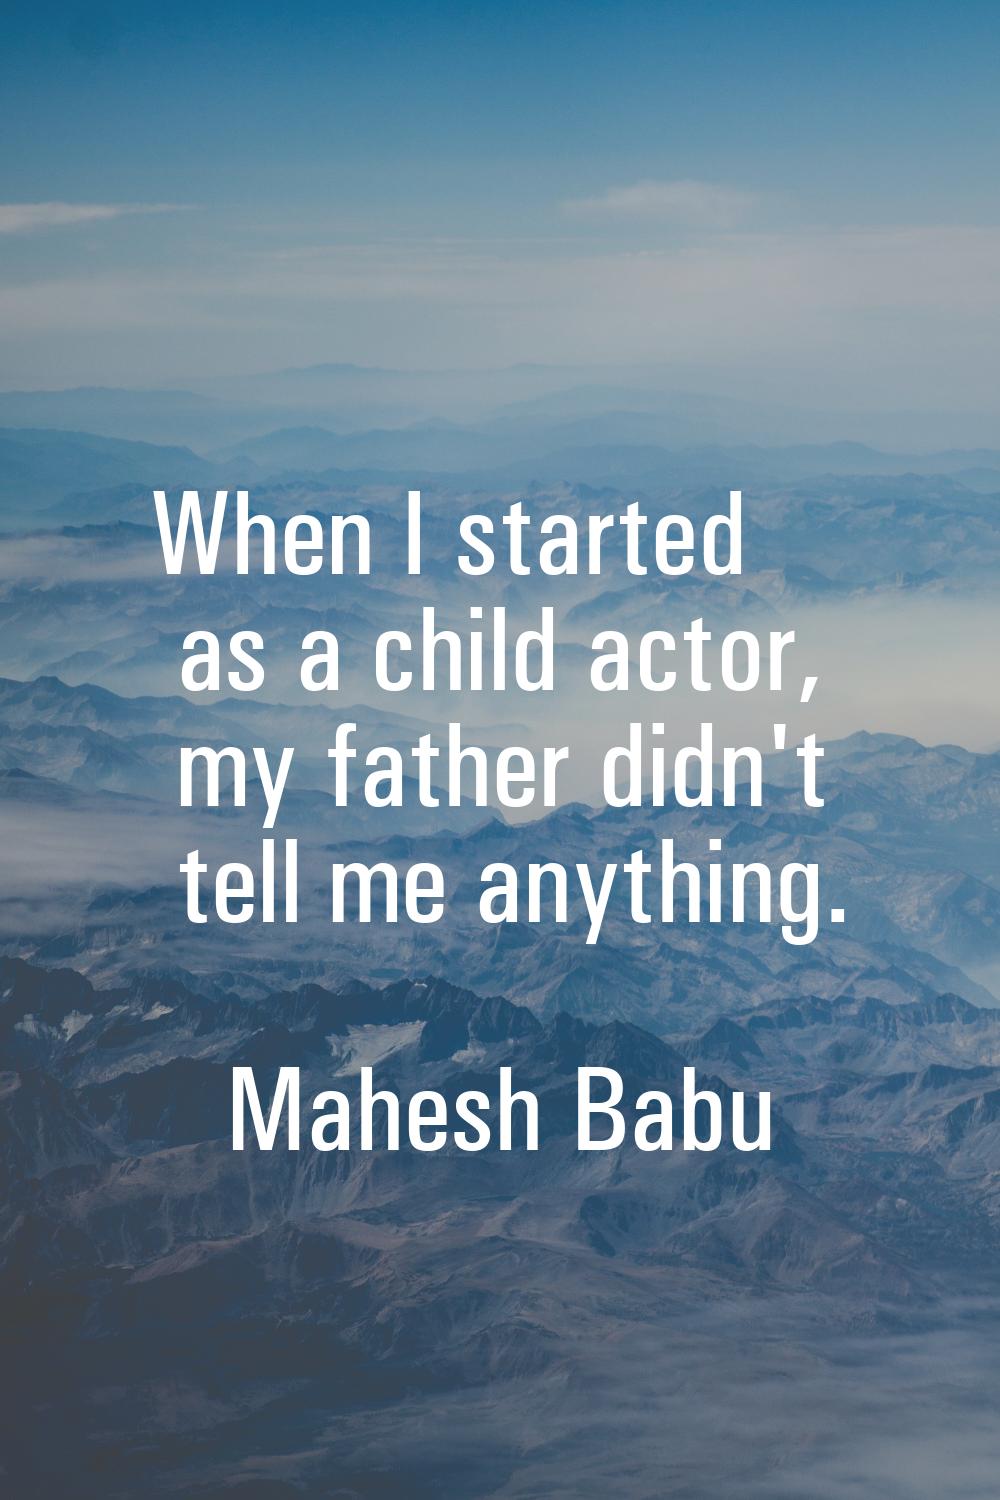 When I started as a child actor, my father didn't tell me anything.